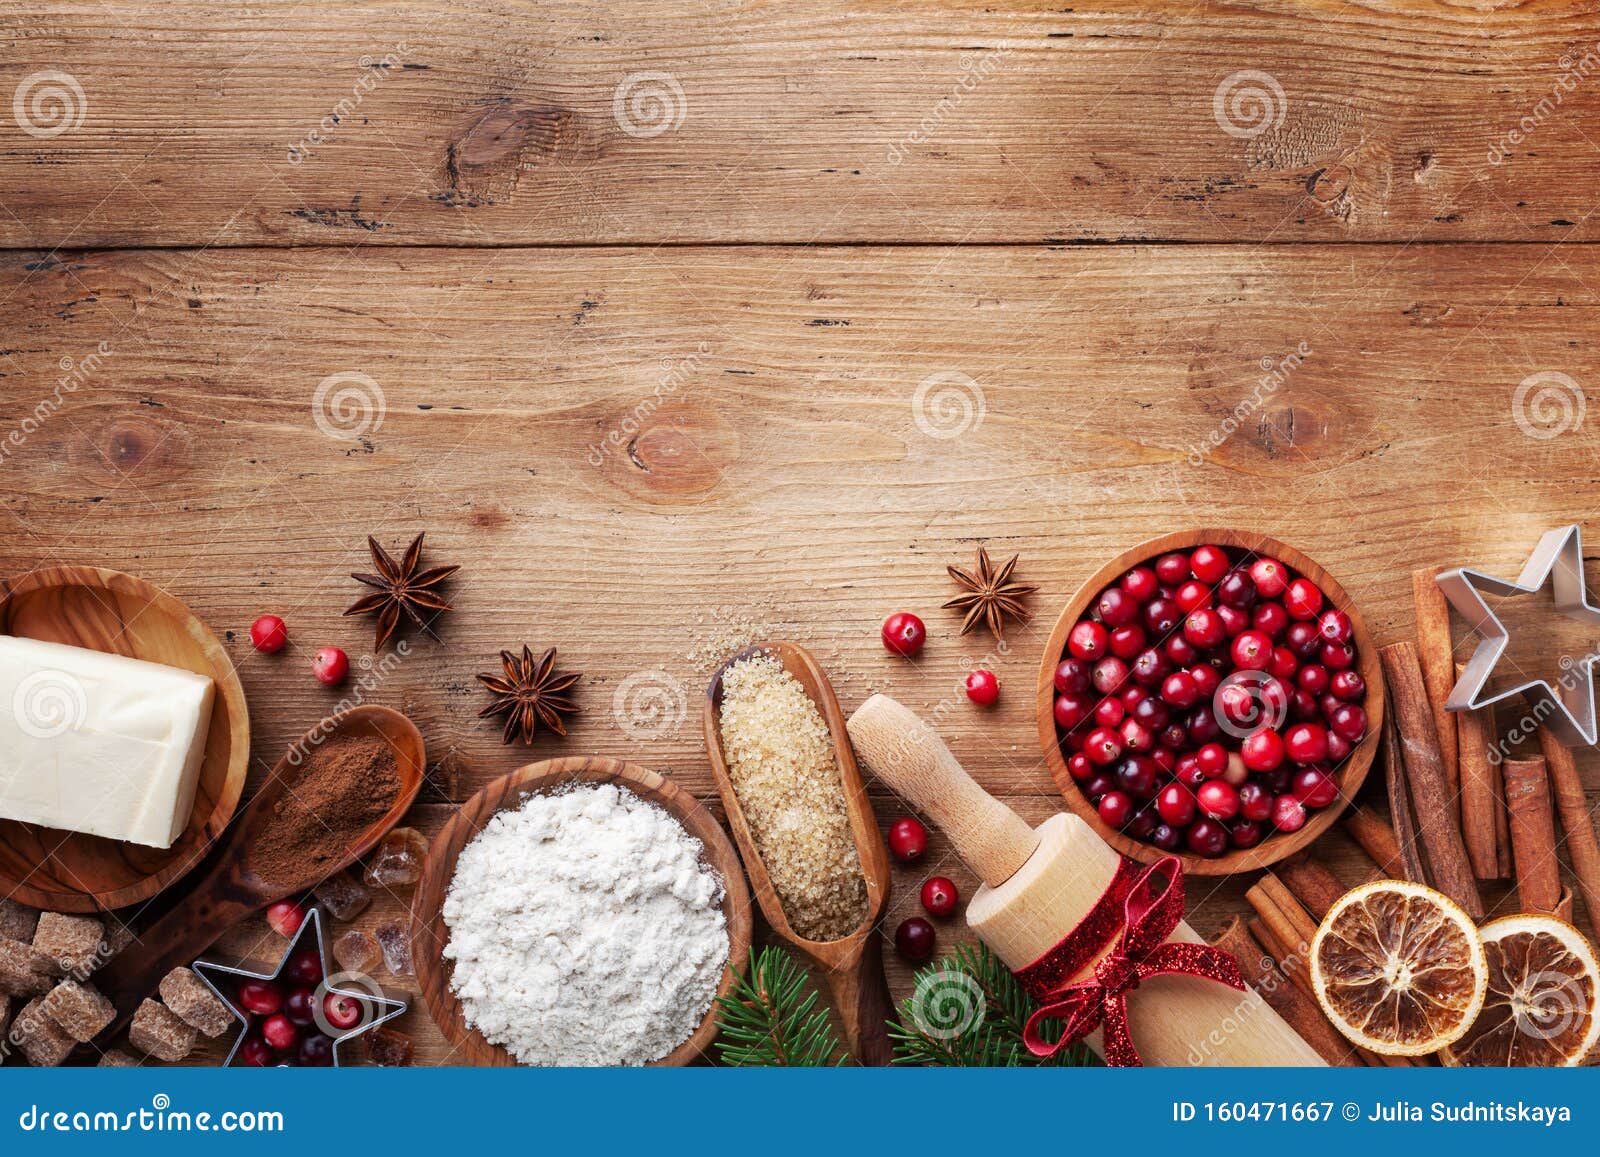 Bakery Background With Ingredients For Cooking Christmas Baking Flour Brown Sugar Butter Cranberry And Spices On Wooden Table Stock Image Image Of Decoration Background